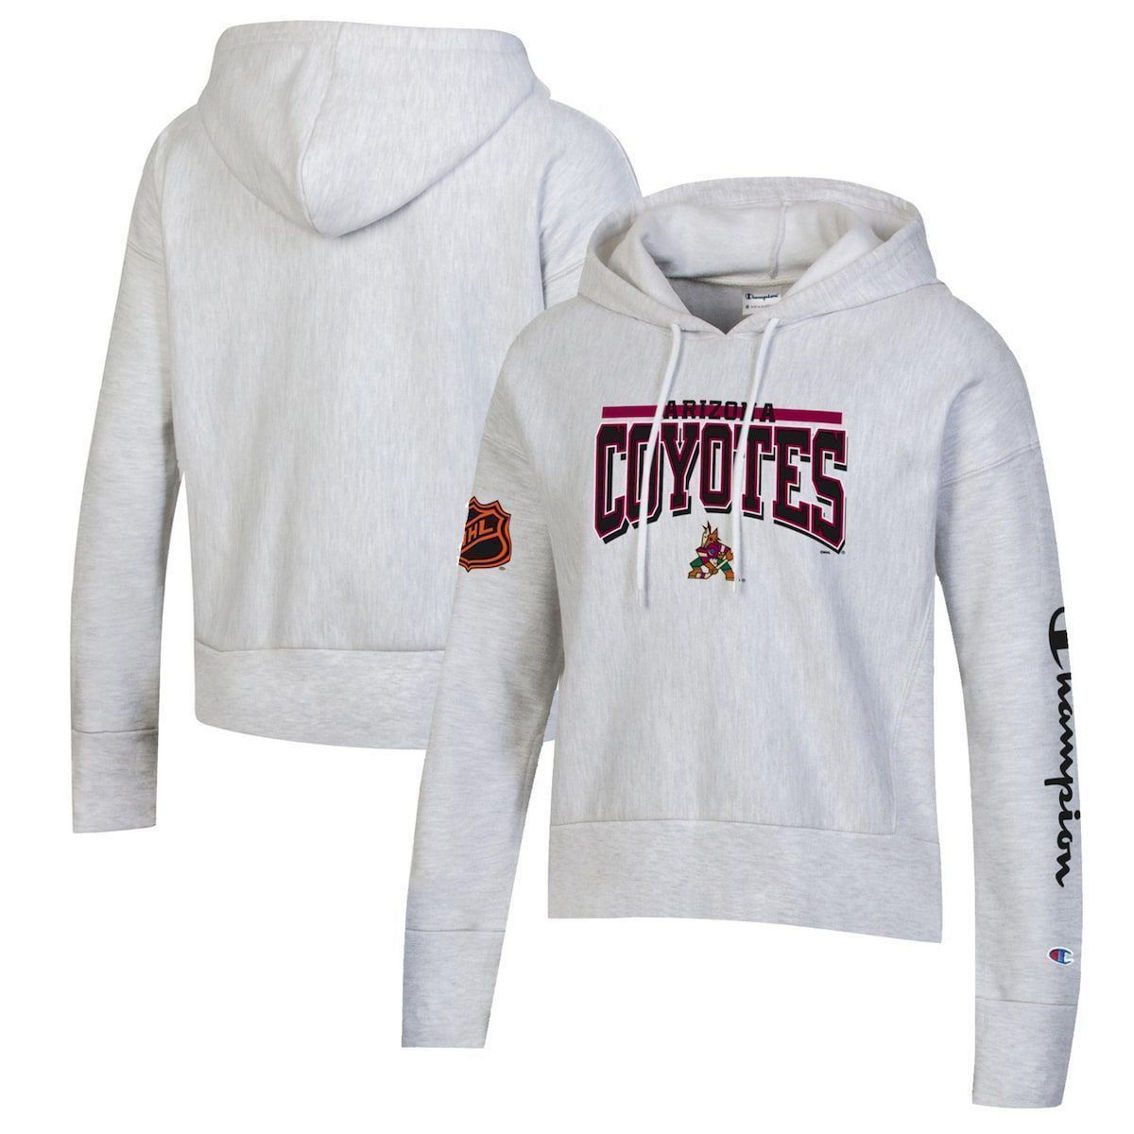 Champion Women's Heathered Gray Arizona Coyotes Reverse Weave Pullover Hoodie - Image 2 of 4